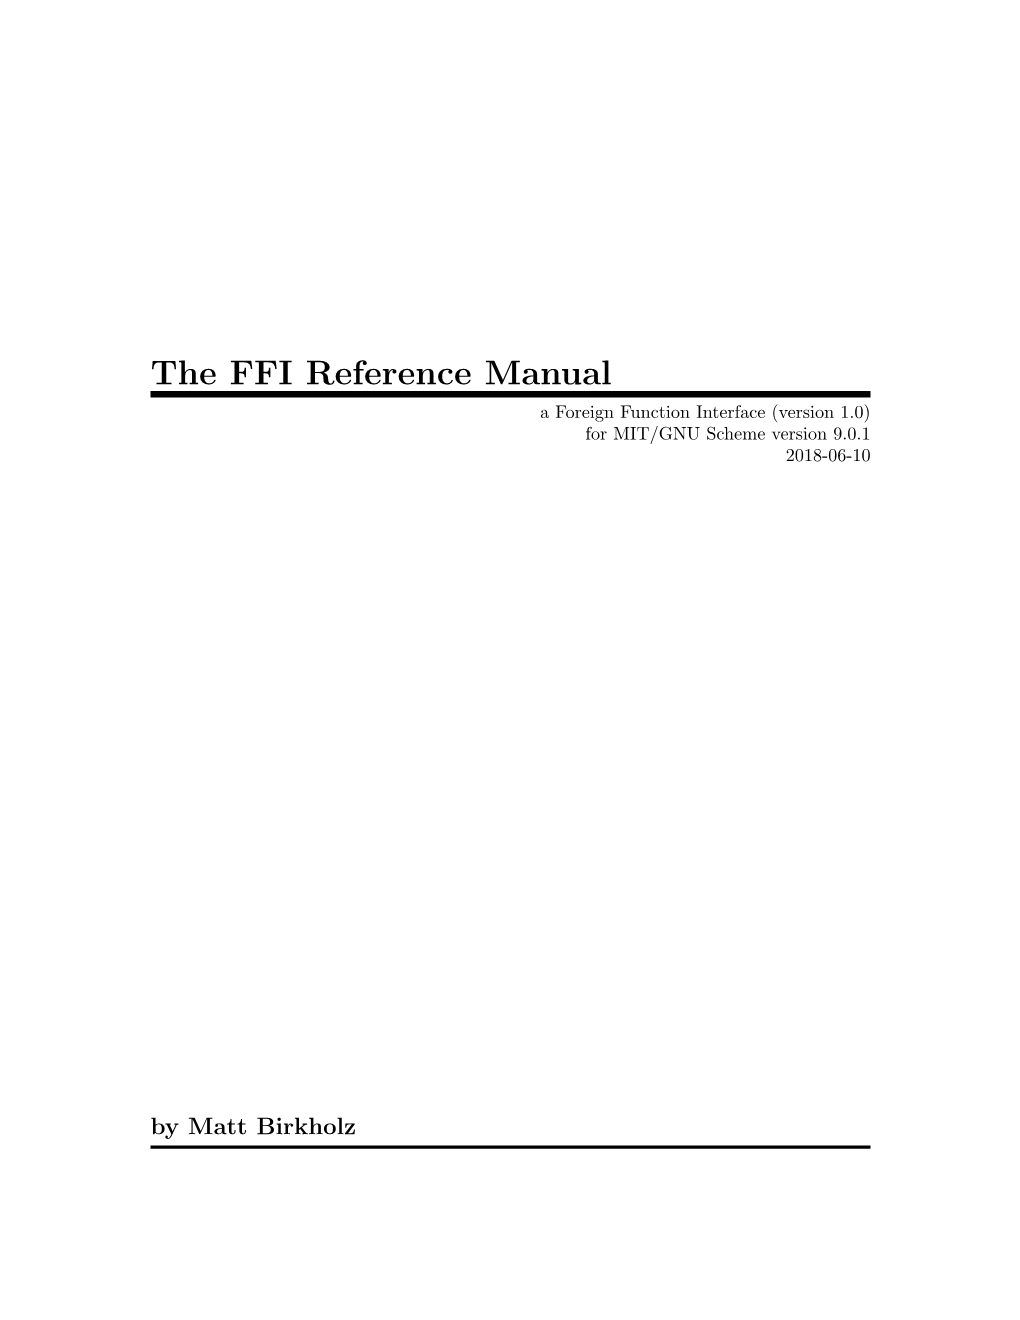 The FFI Reference Manual a Foreign Function Interface (Version 1.0) for MIT/GNU Scheme Version 9.0.1 2018-06-10